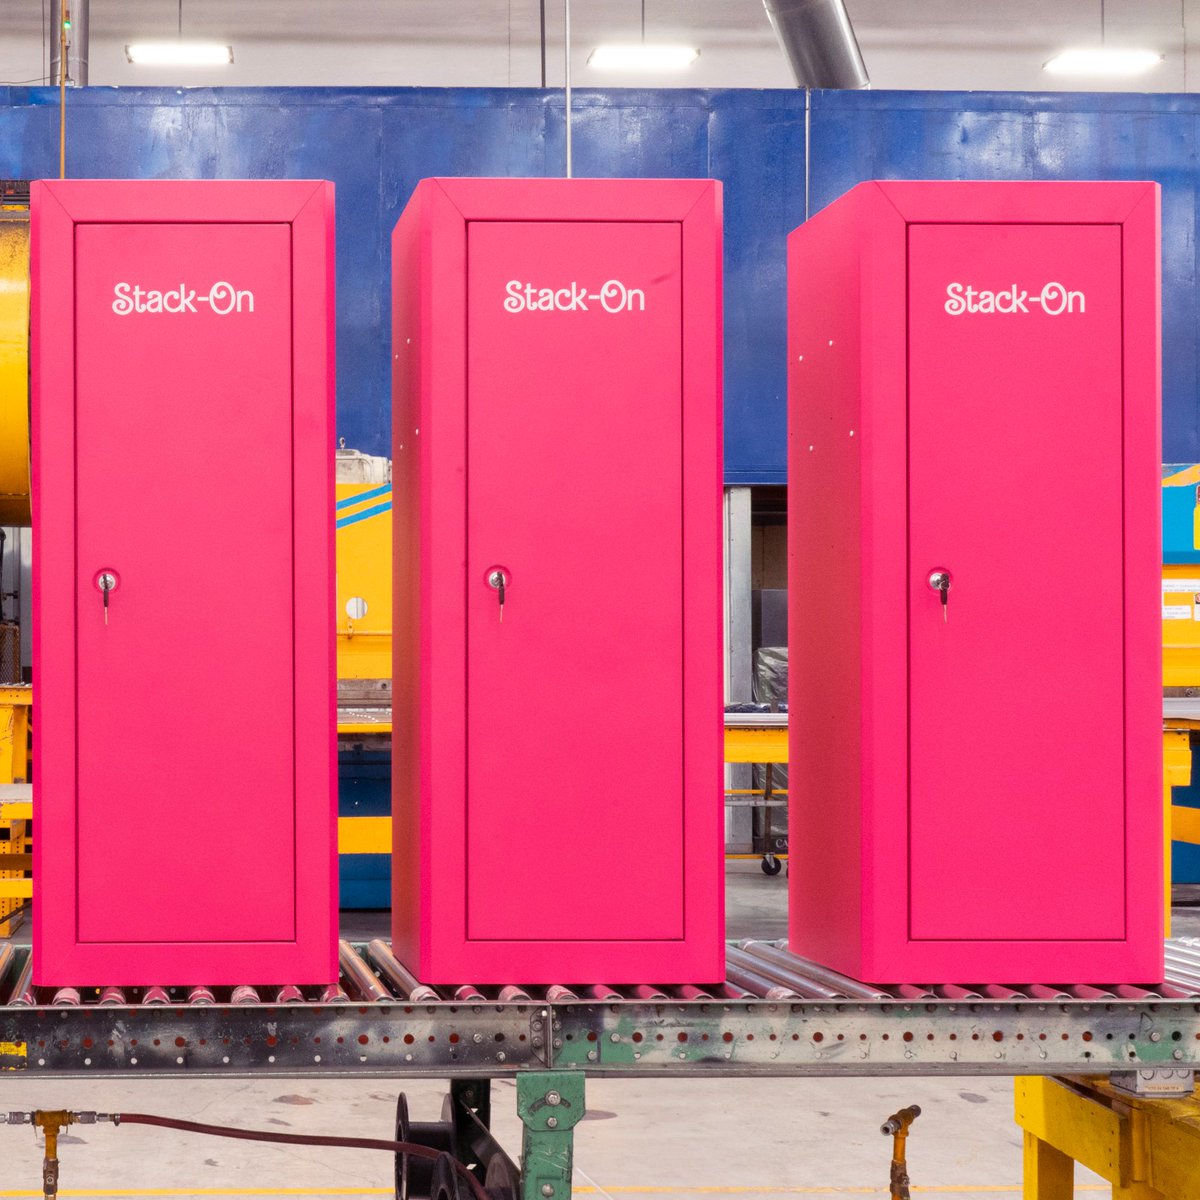 Your dream house isn't complete without a pink gun cabinet 🔐 🩷

Visit tractorsupply.com to secure your cabinet today!

#safe #cannon #cannonsafe #firesafety #belongings #valuables #safety #protectyourvaluables #organize #gunsafe